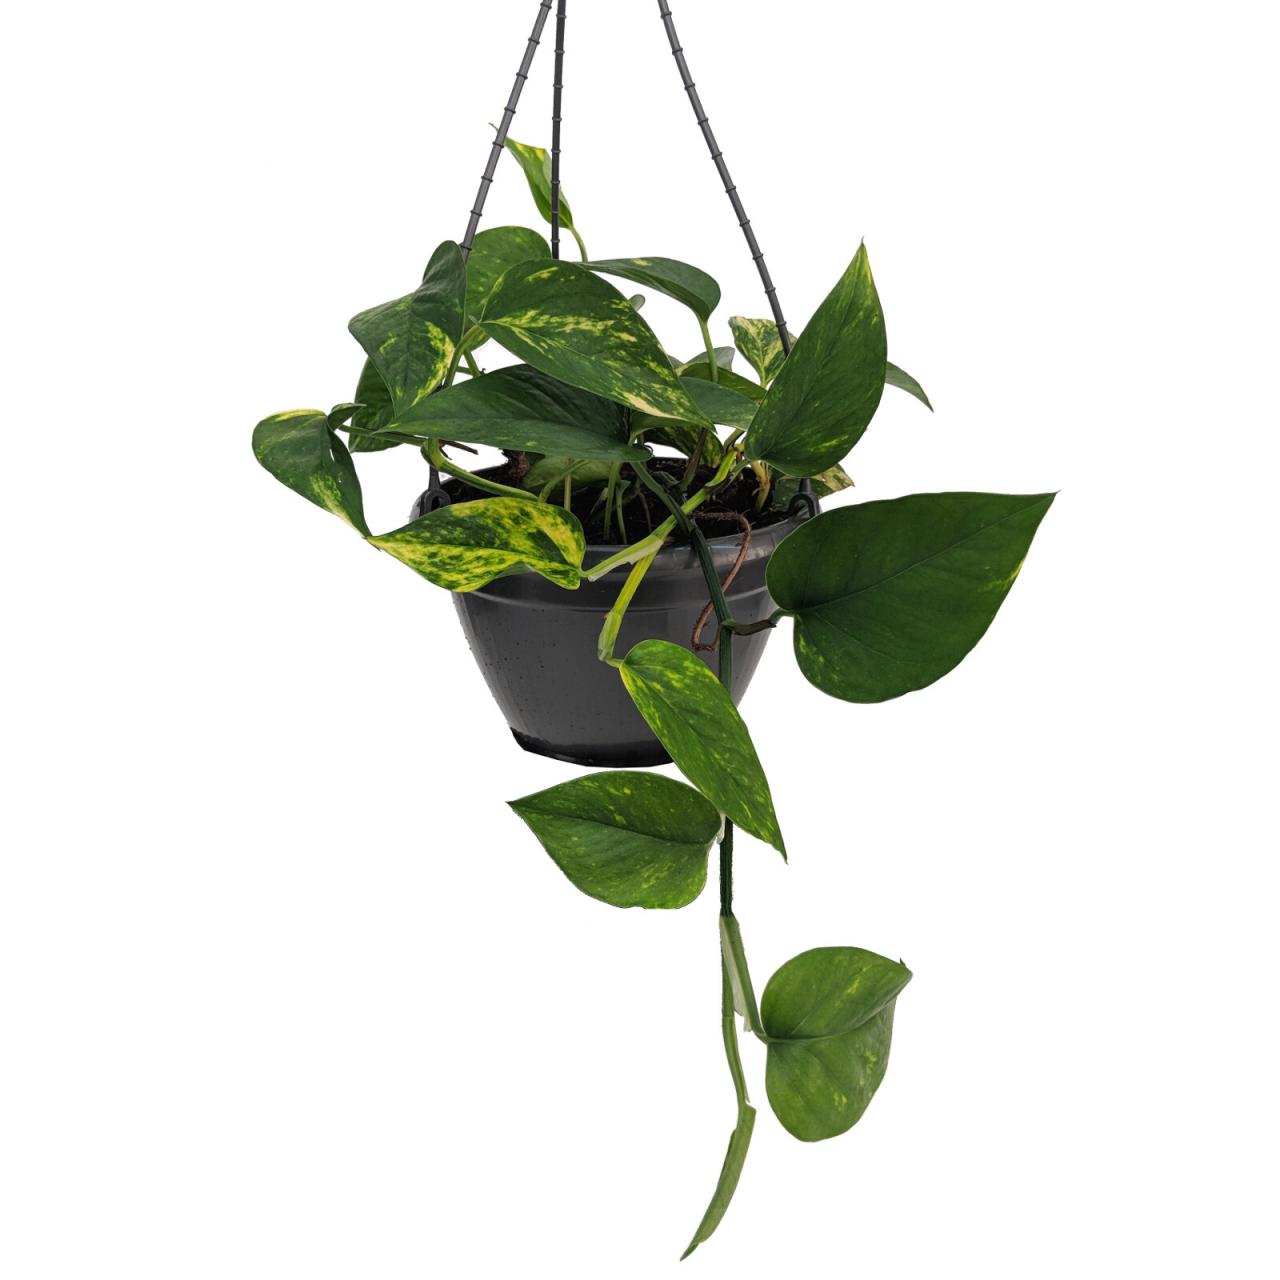 Hanging Plants Indoor | Hanging Devil's Ivy from Bunnings: A Plant Parent's Guide to Care and Varieties